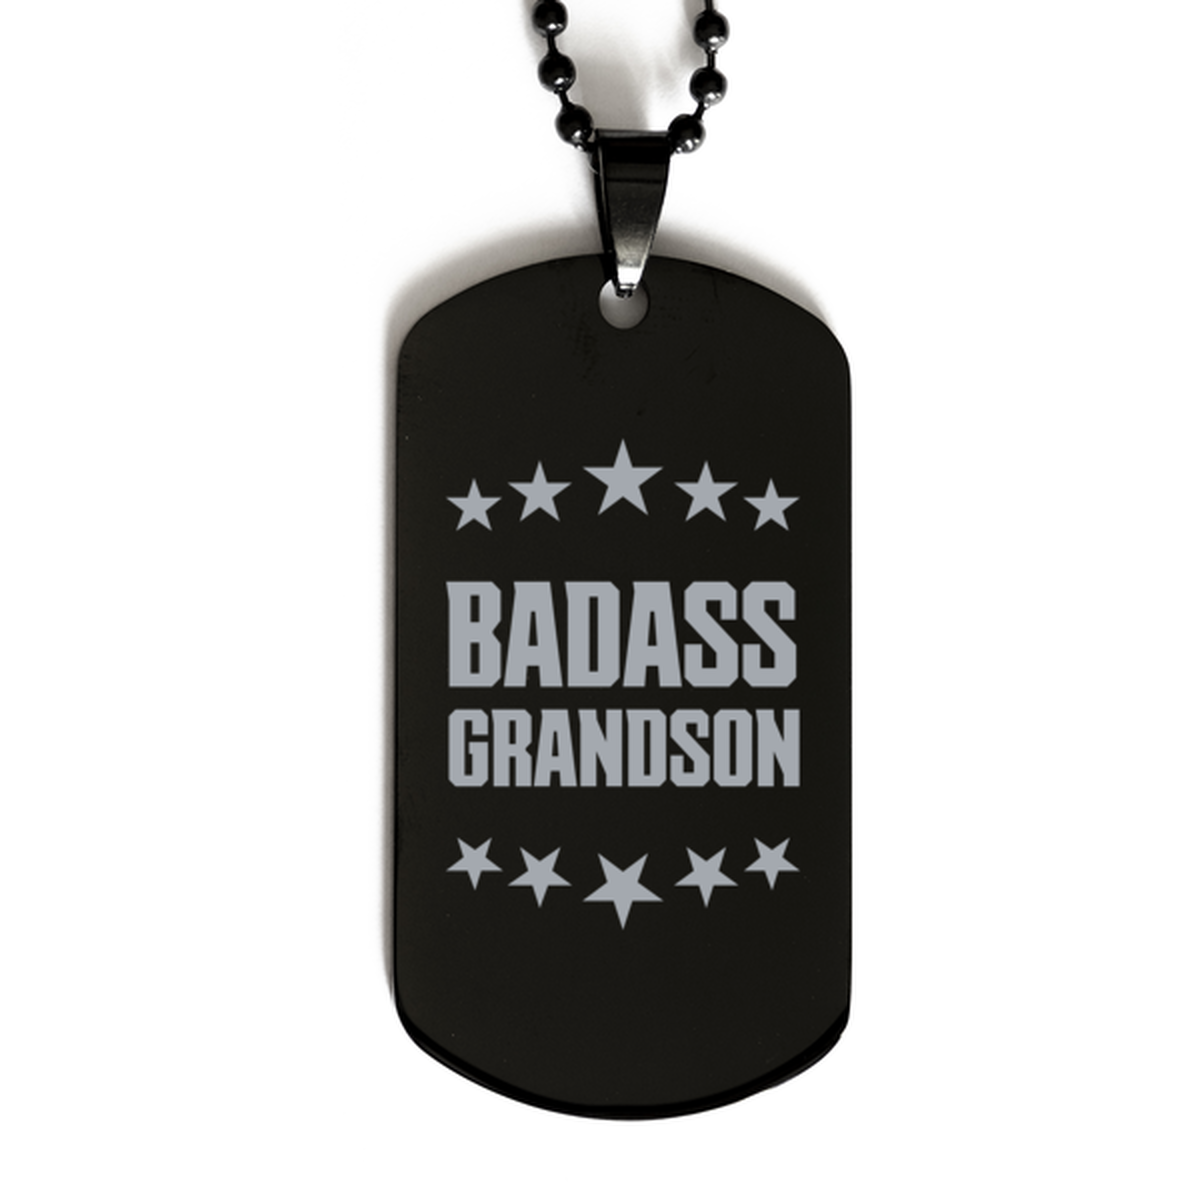 Grandson Black Dog Tag, Badass Grandson, Funny Family Gifts  Necklace For Grandson From Grandfather Grandmother